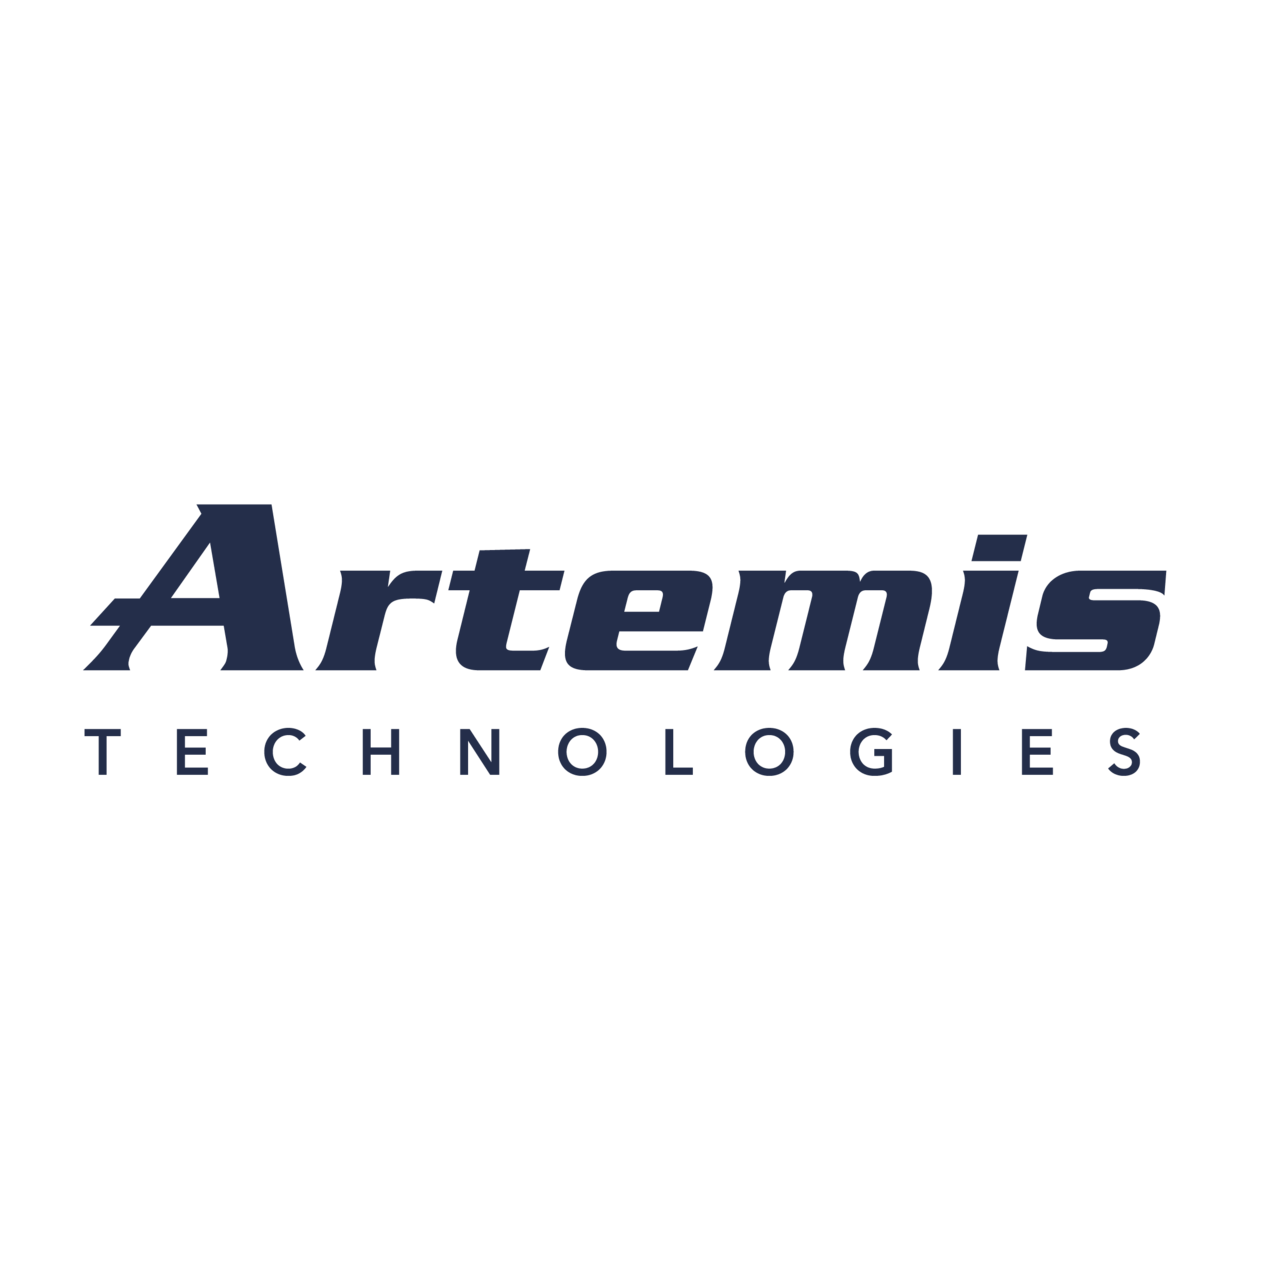 Artemis Technologies becomes a regular member of CharIN